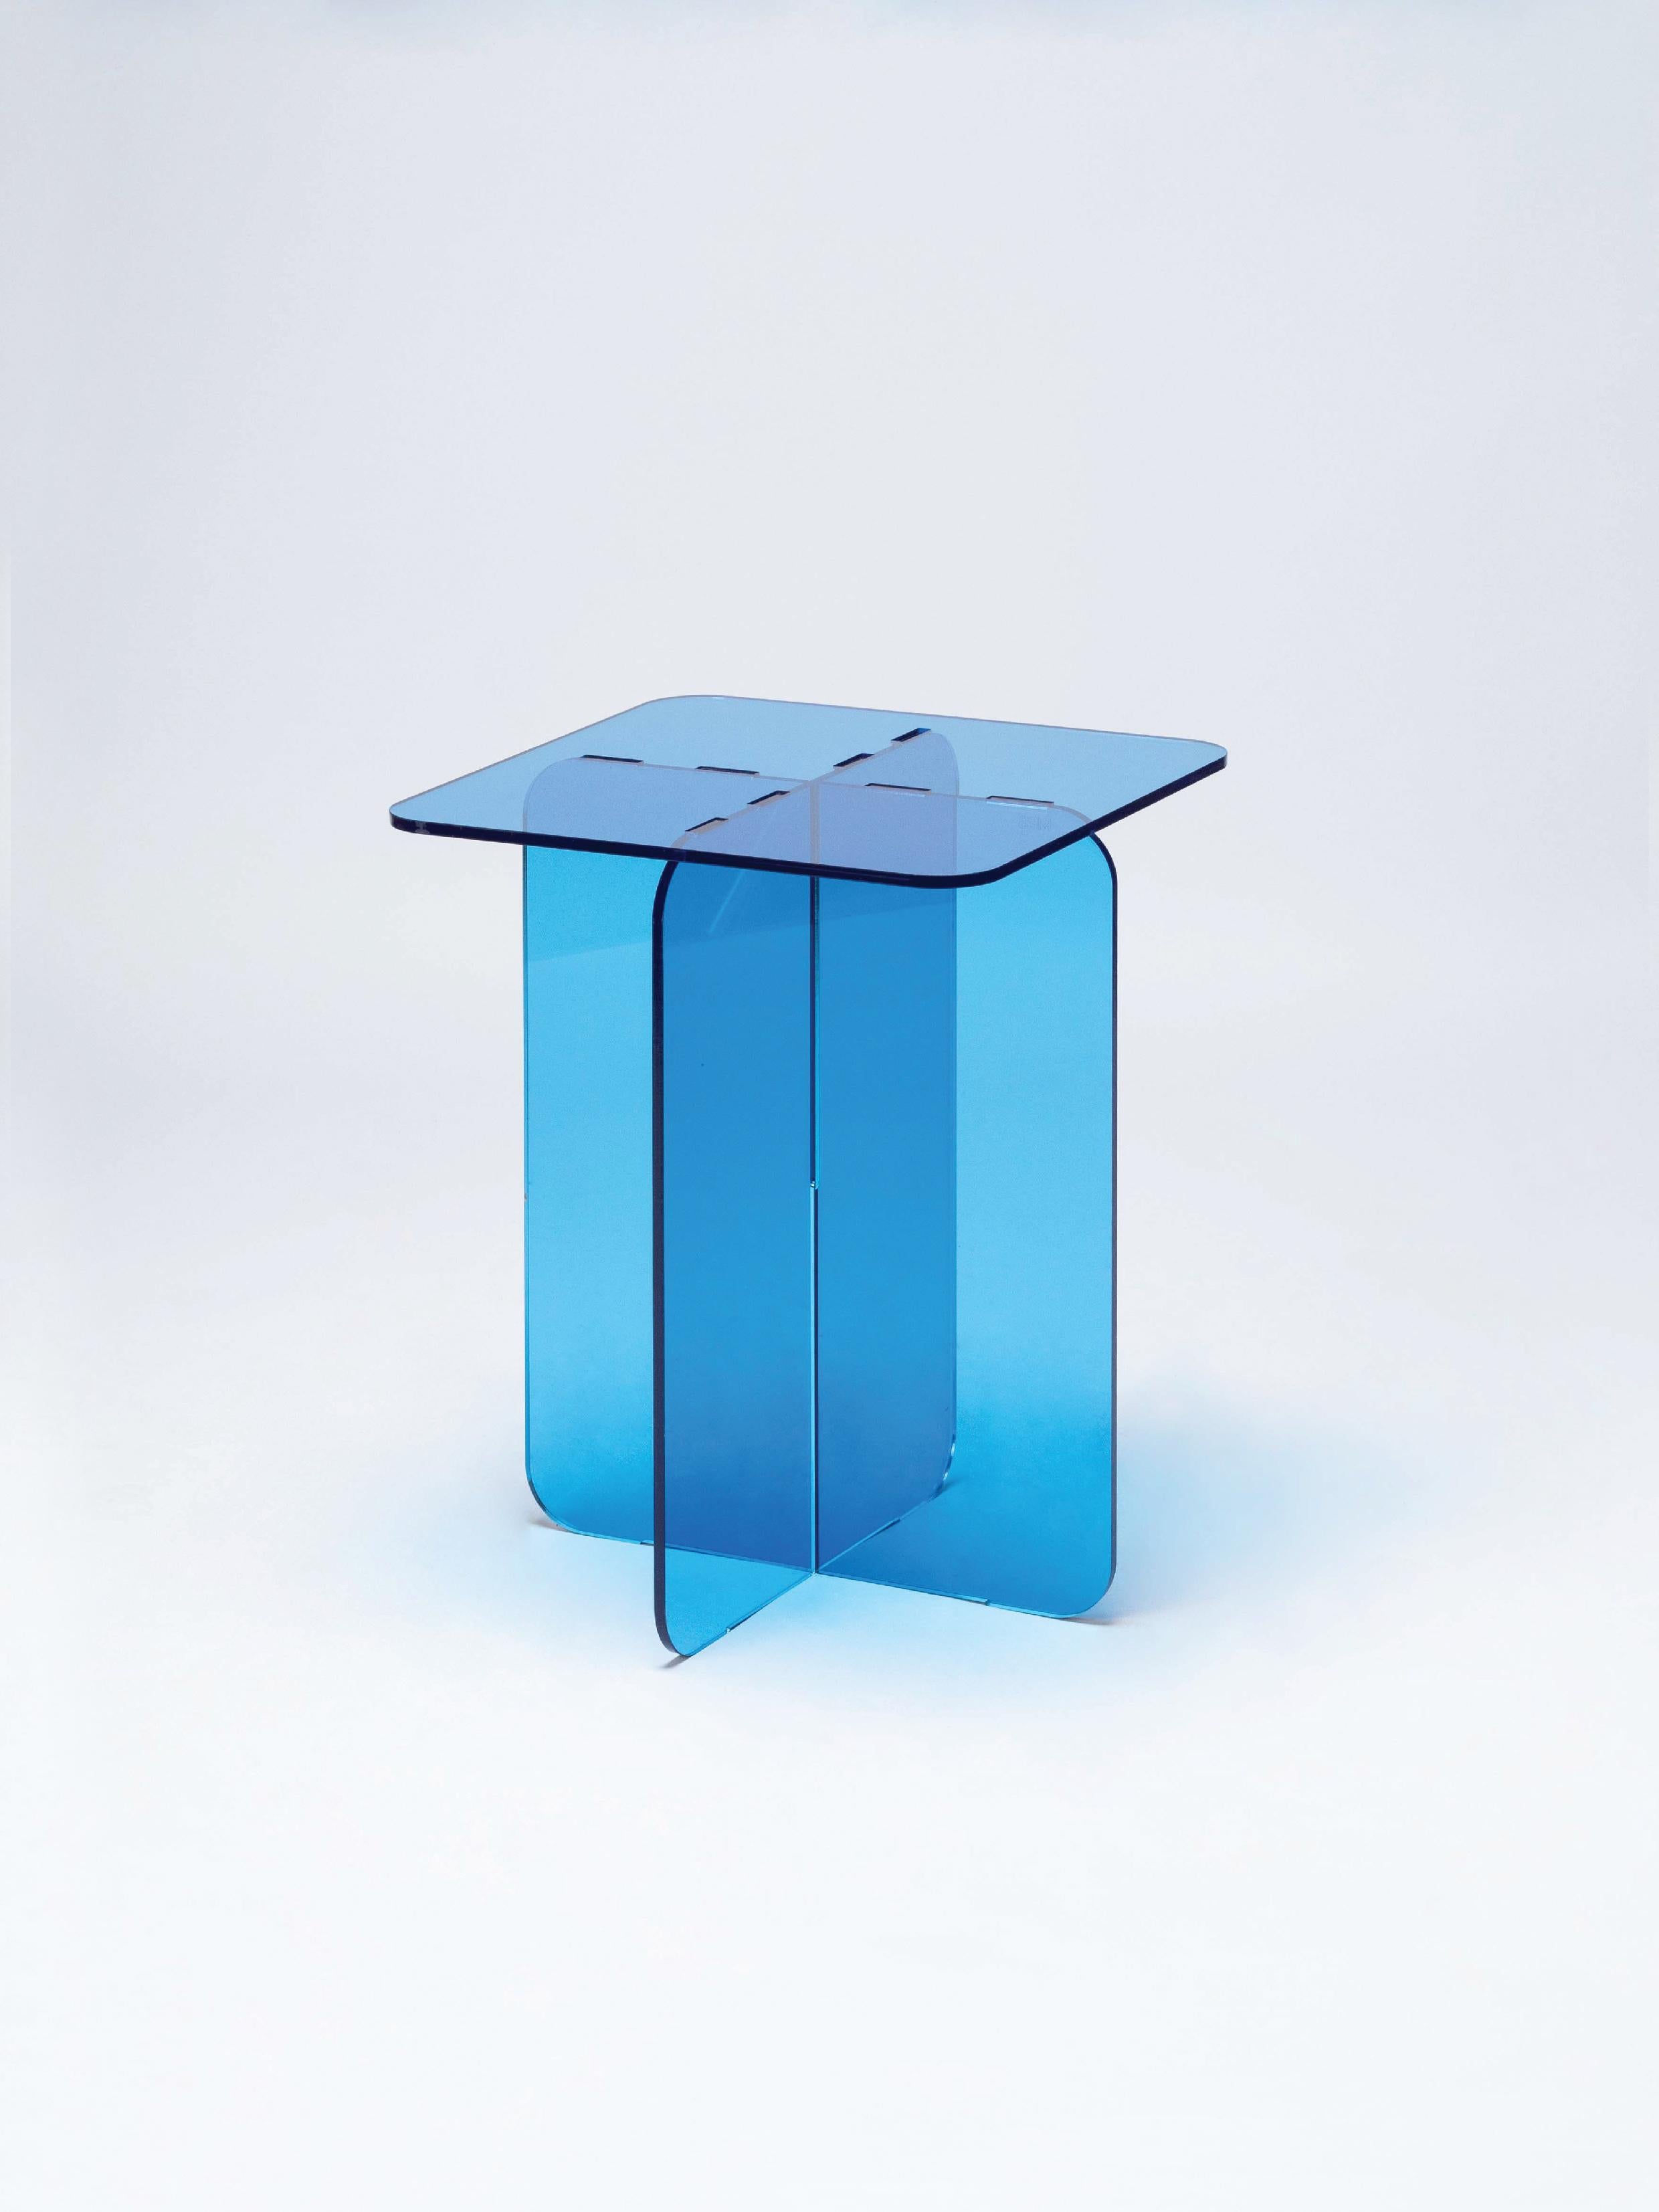 Minimaliste ROMA Table d'appoint Contemporary Acrylic by Ries (Square Top) en vente